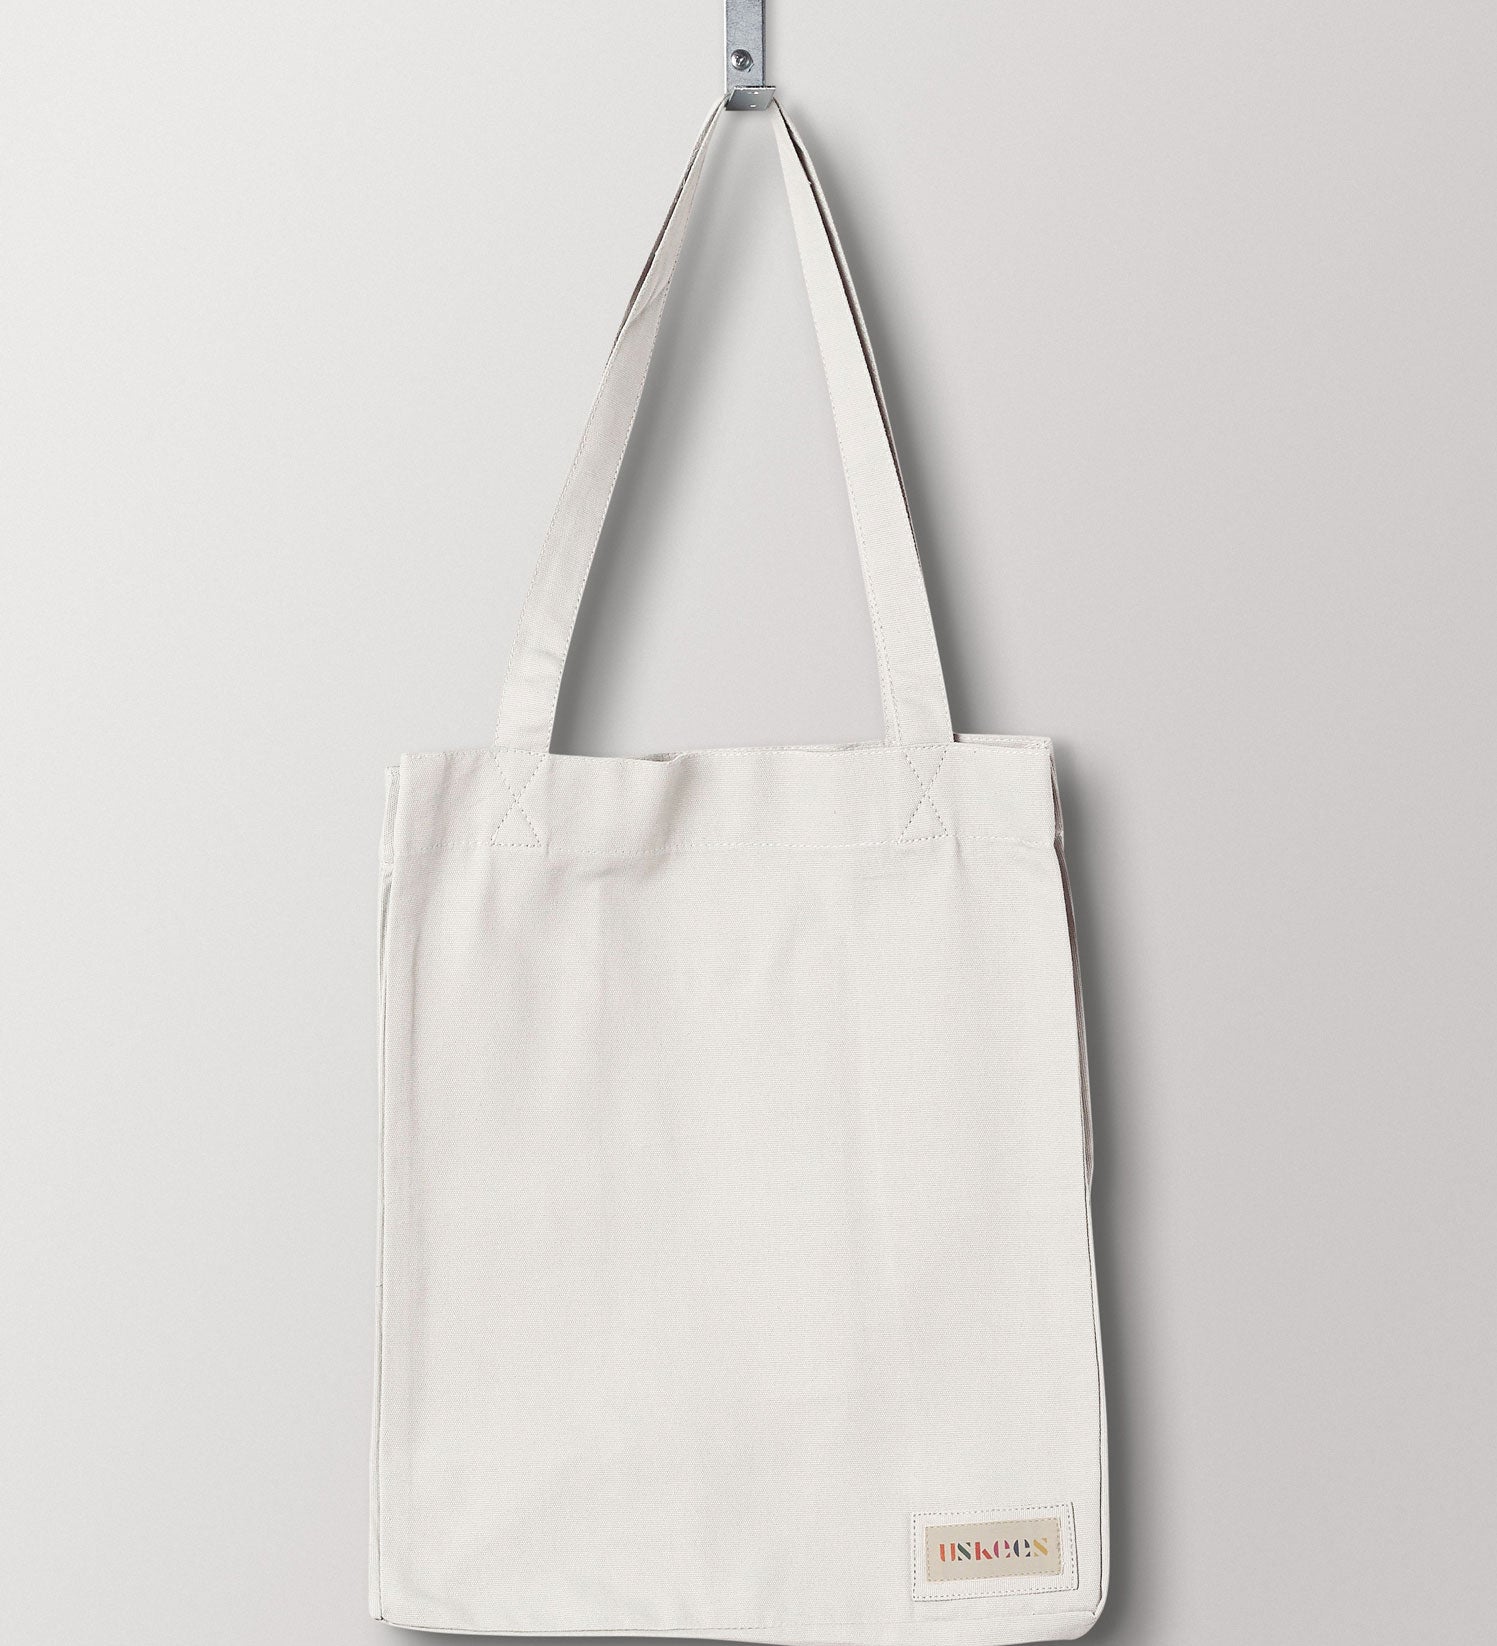 Full front hanging shot of Uskees #4002, small cream tote bag, showing double handles and Uskees woven logo.